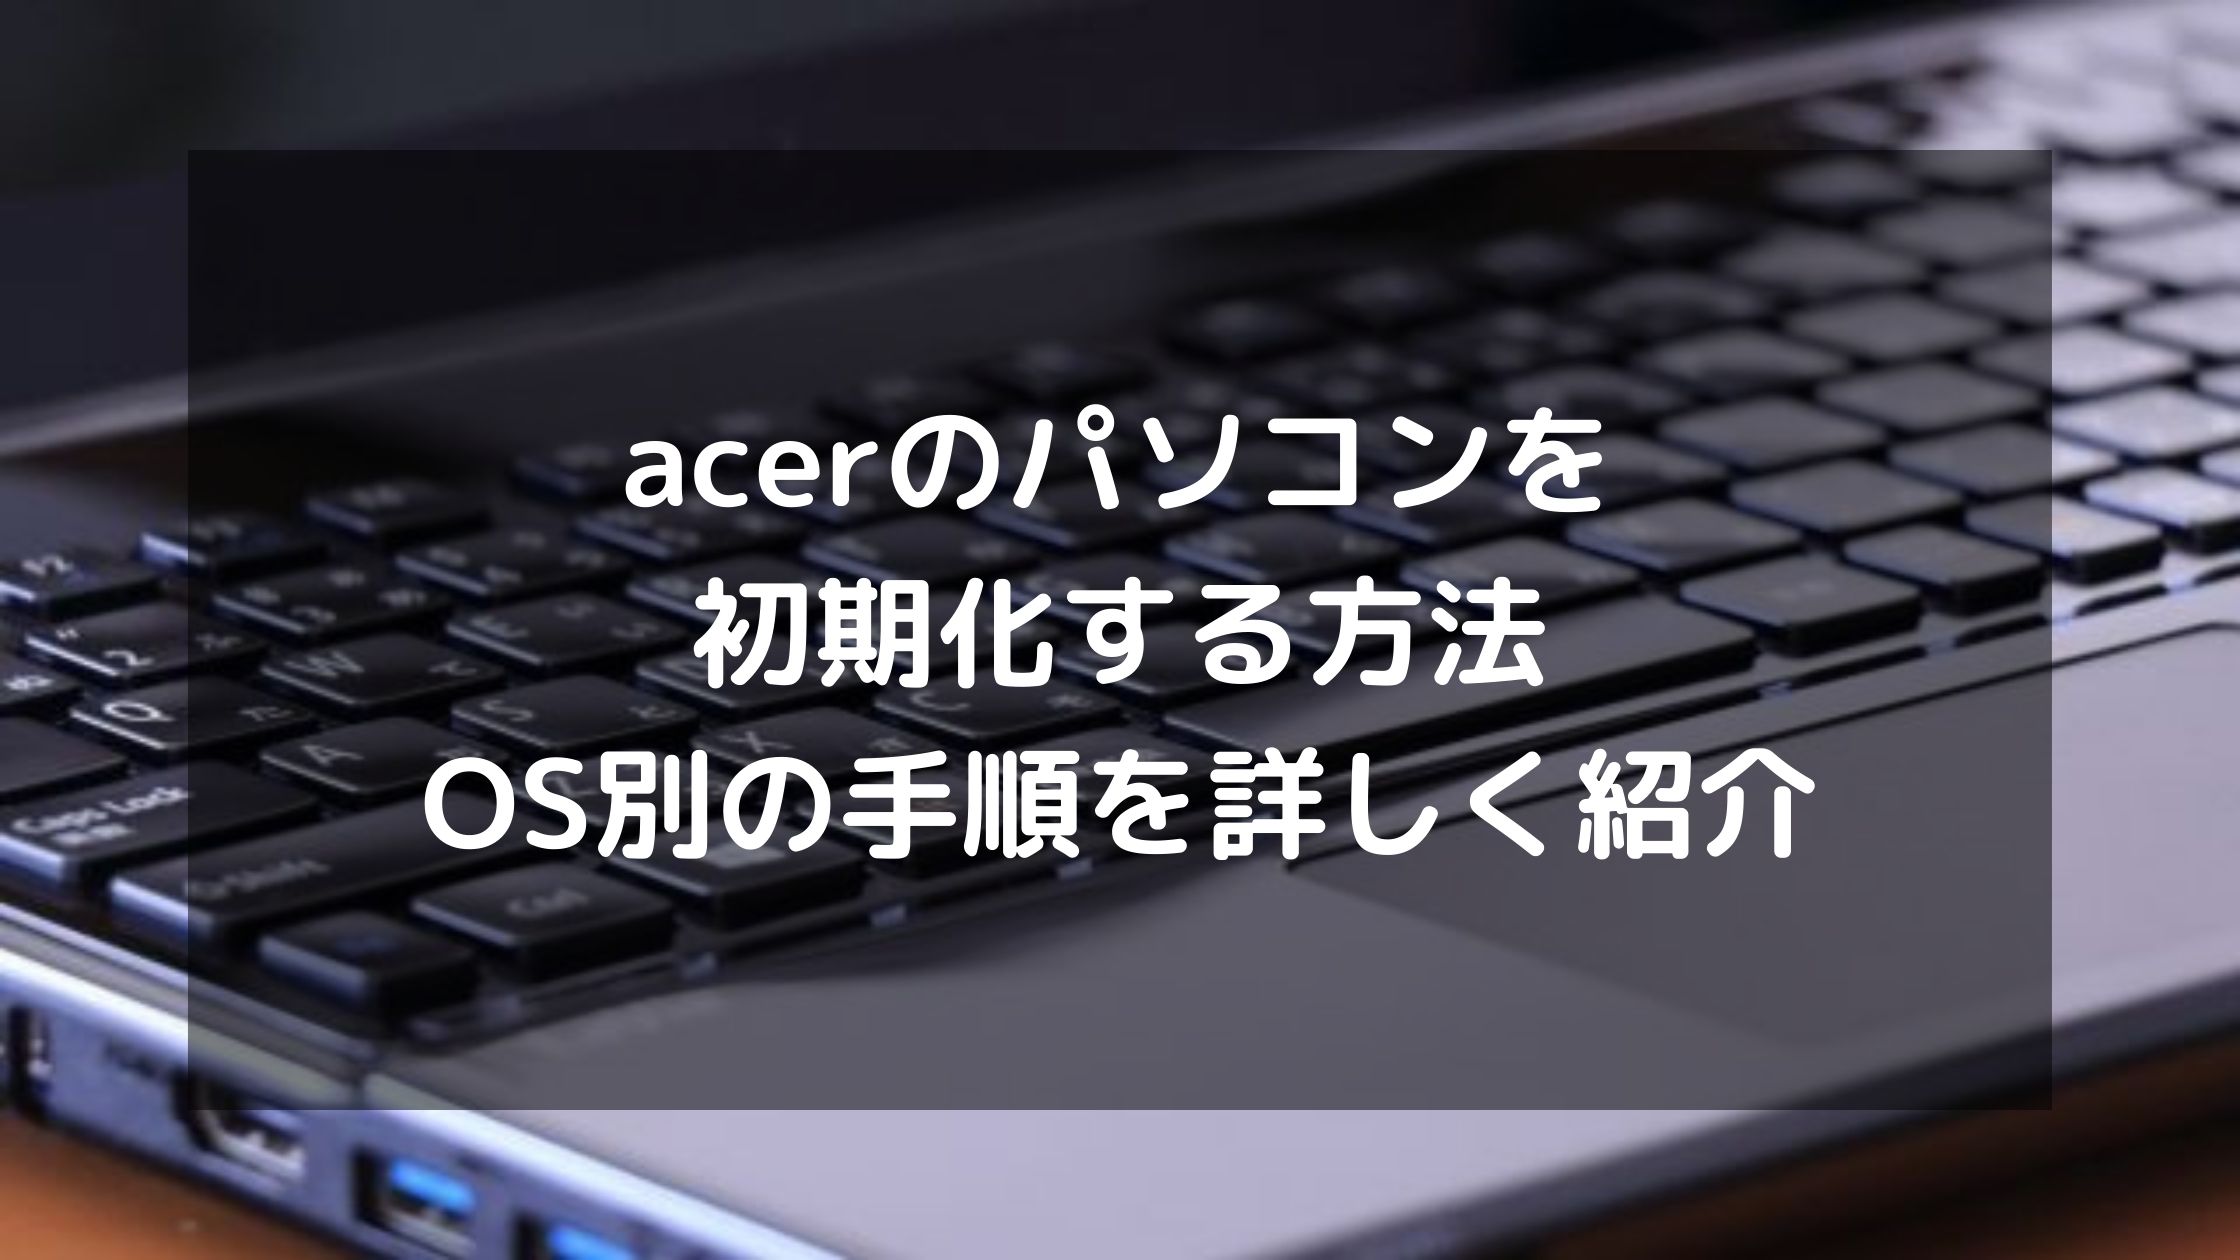 acer 軽量型 デスクトップpc 初期化済み